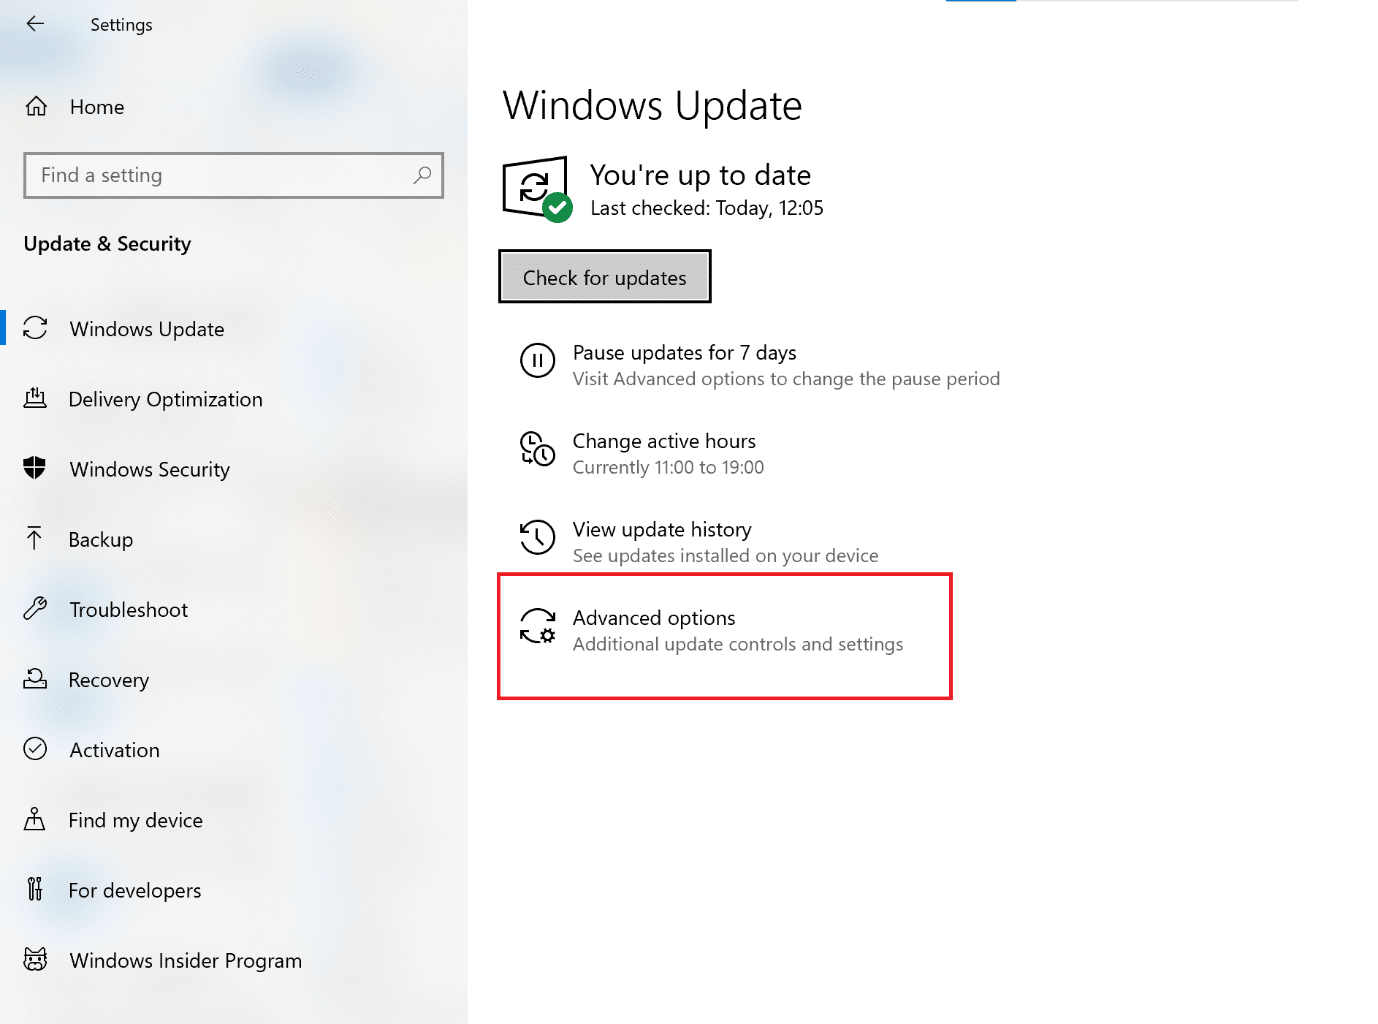 click on Advanced Options under Windows update